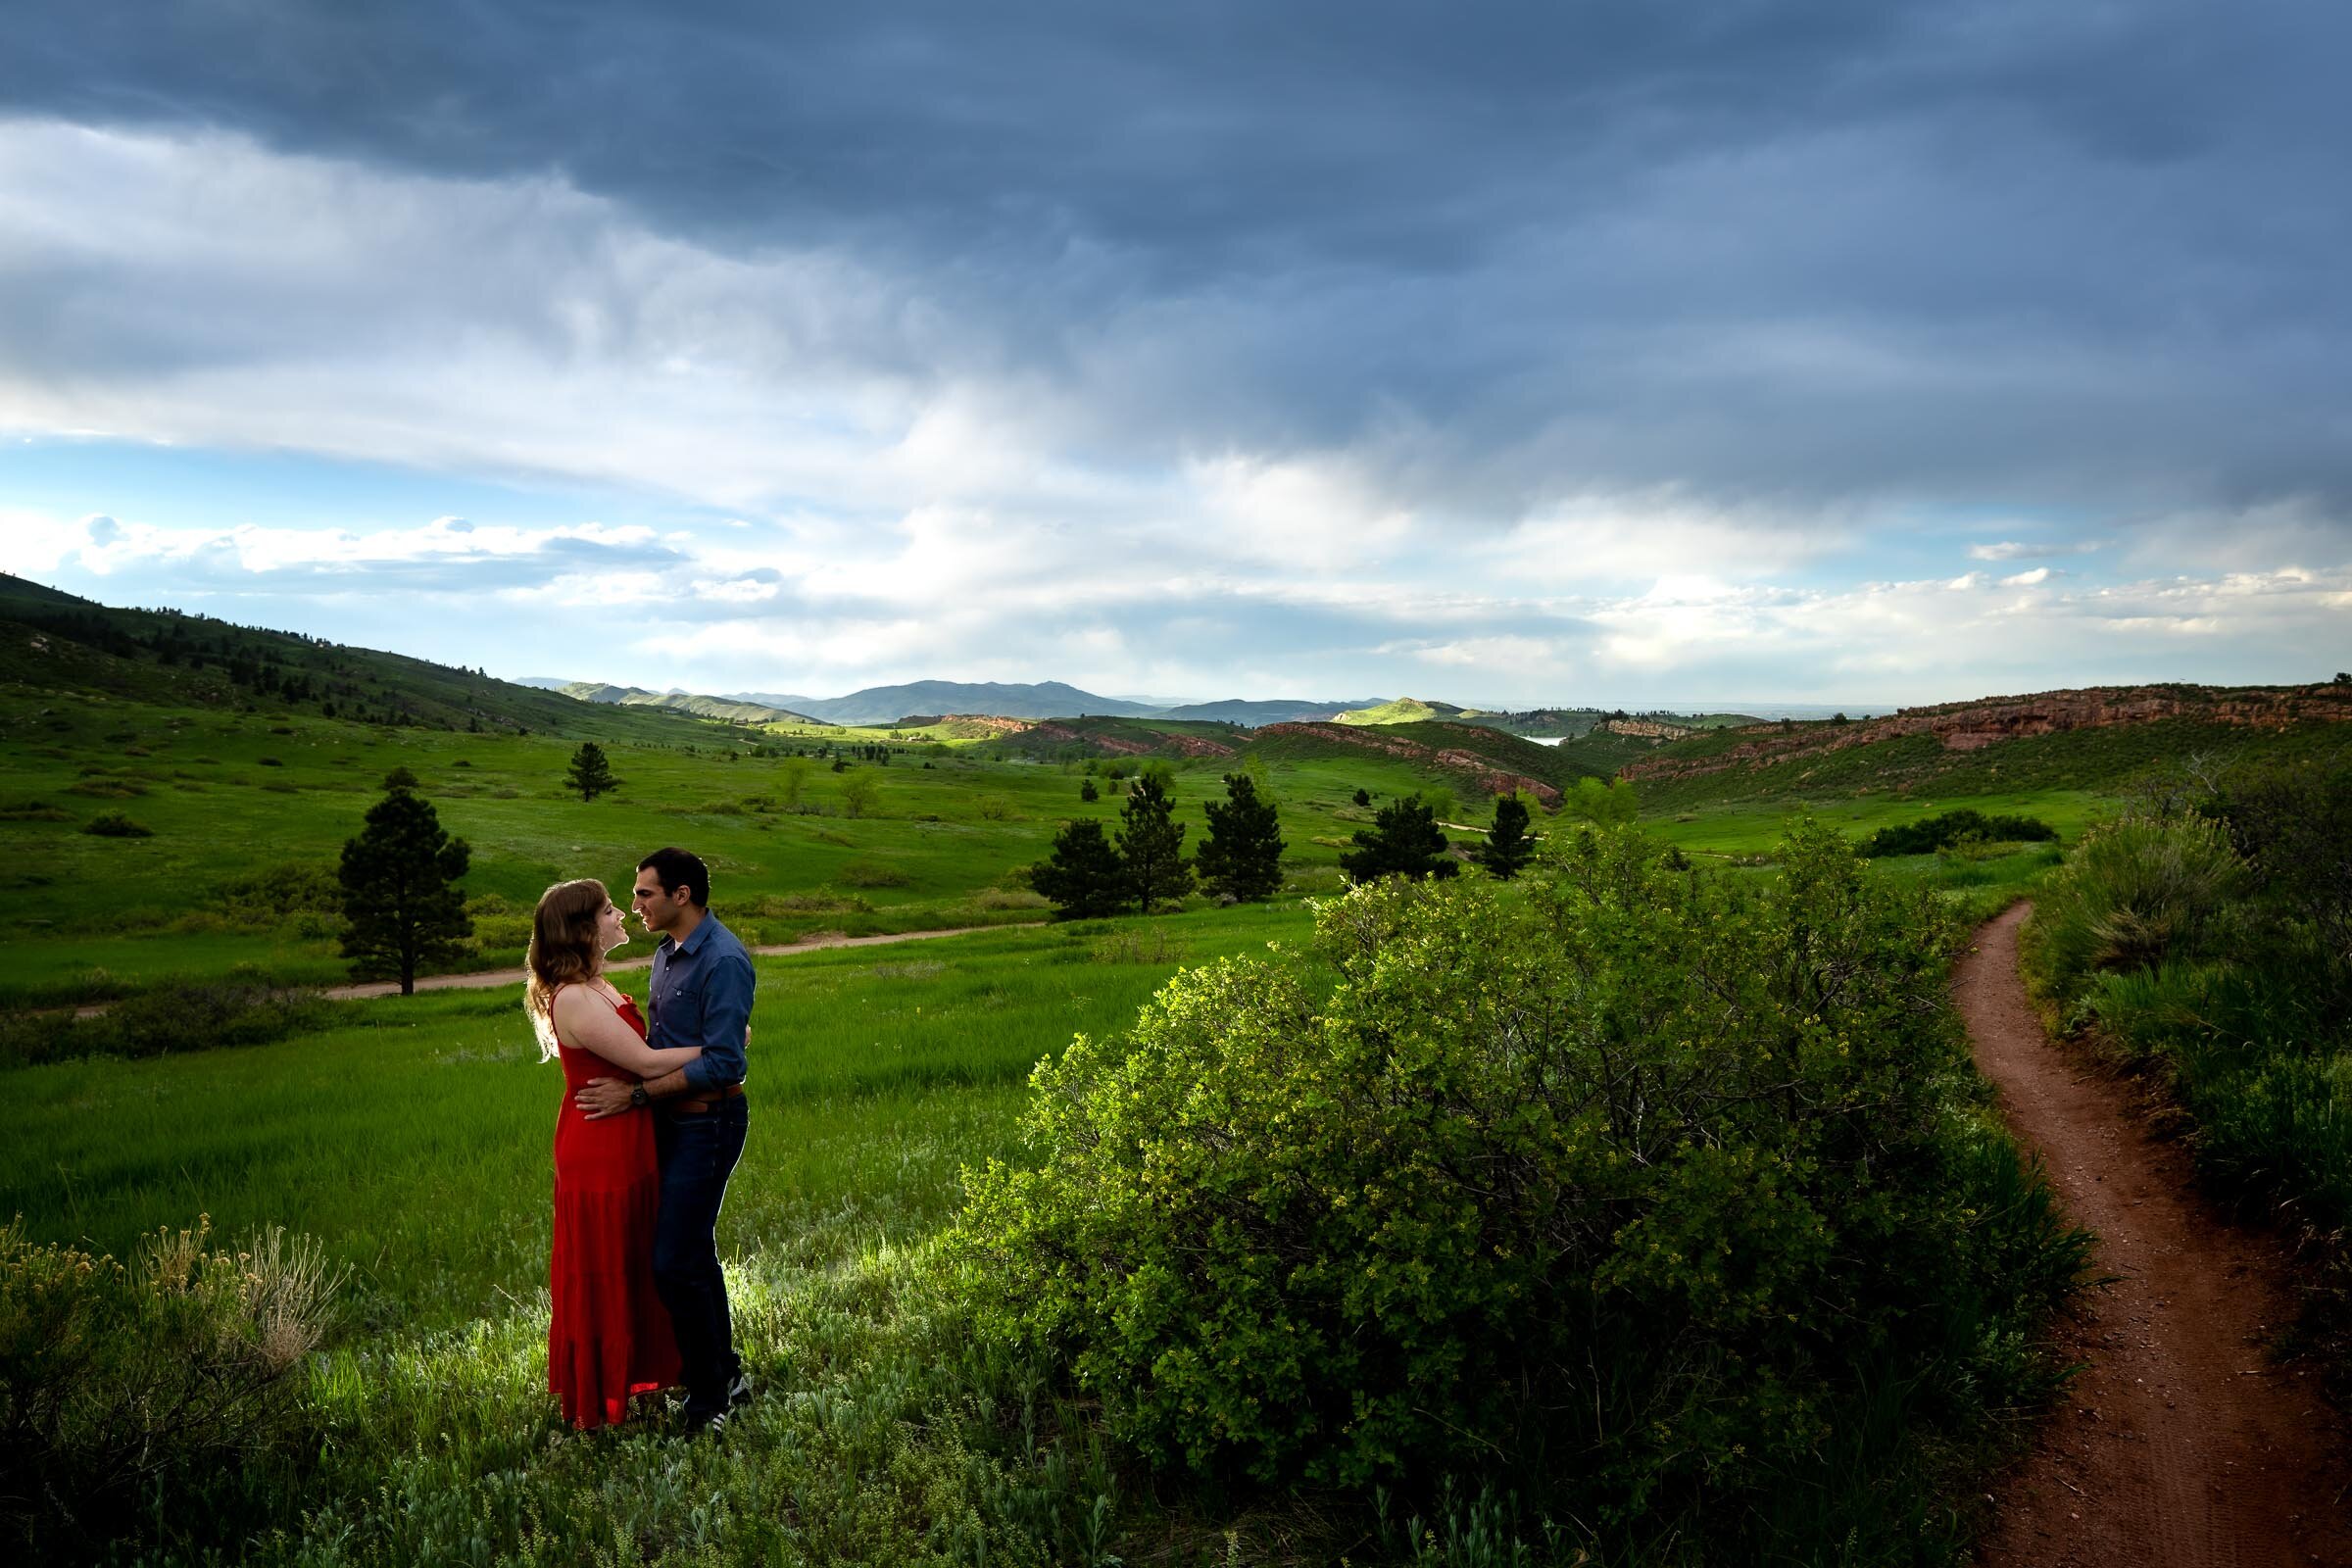 Engaged couple embraces in a luscious green landscape of rolling foothills during golden hour, Engagement Photos, Engagement Photo Inspiration, Engagement Photography, Engagement Photographer, Spring Engagement Photos, Fort Collins Engagement Photos, Fort Collins engagement photos, Fort Collins engagement photography, Fort Collins engagement photographer, Colorado engagement photos, Colorado engagement photography, Colorado engagement inspiration